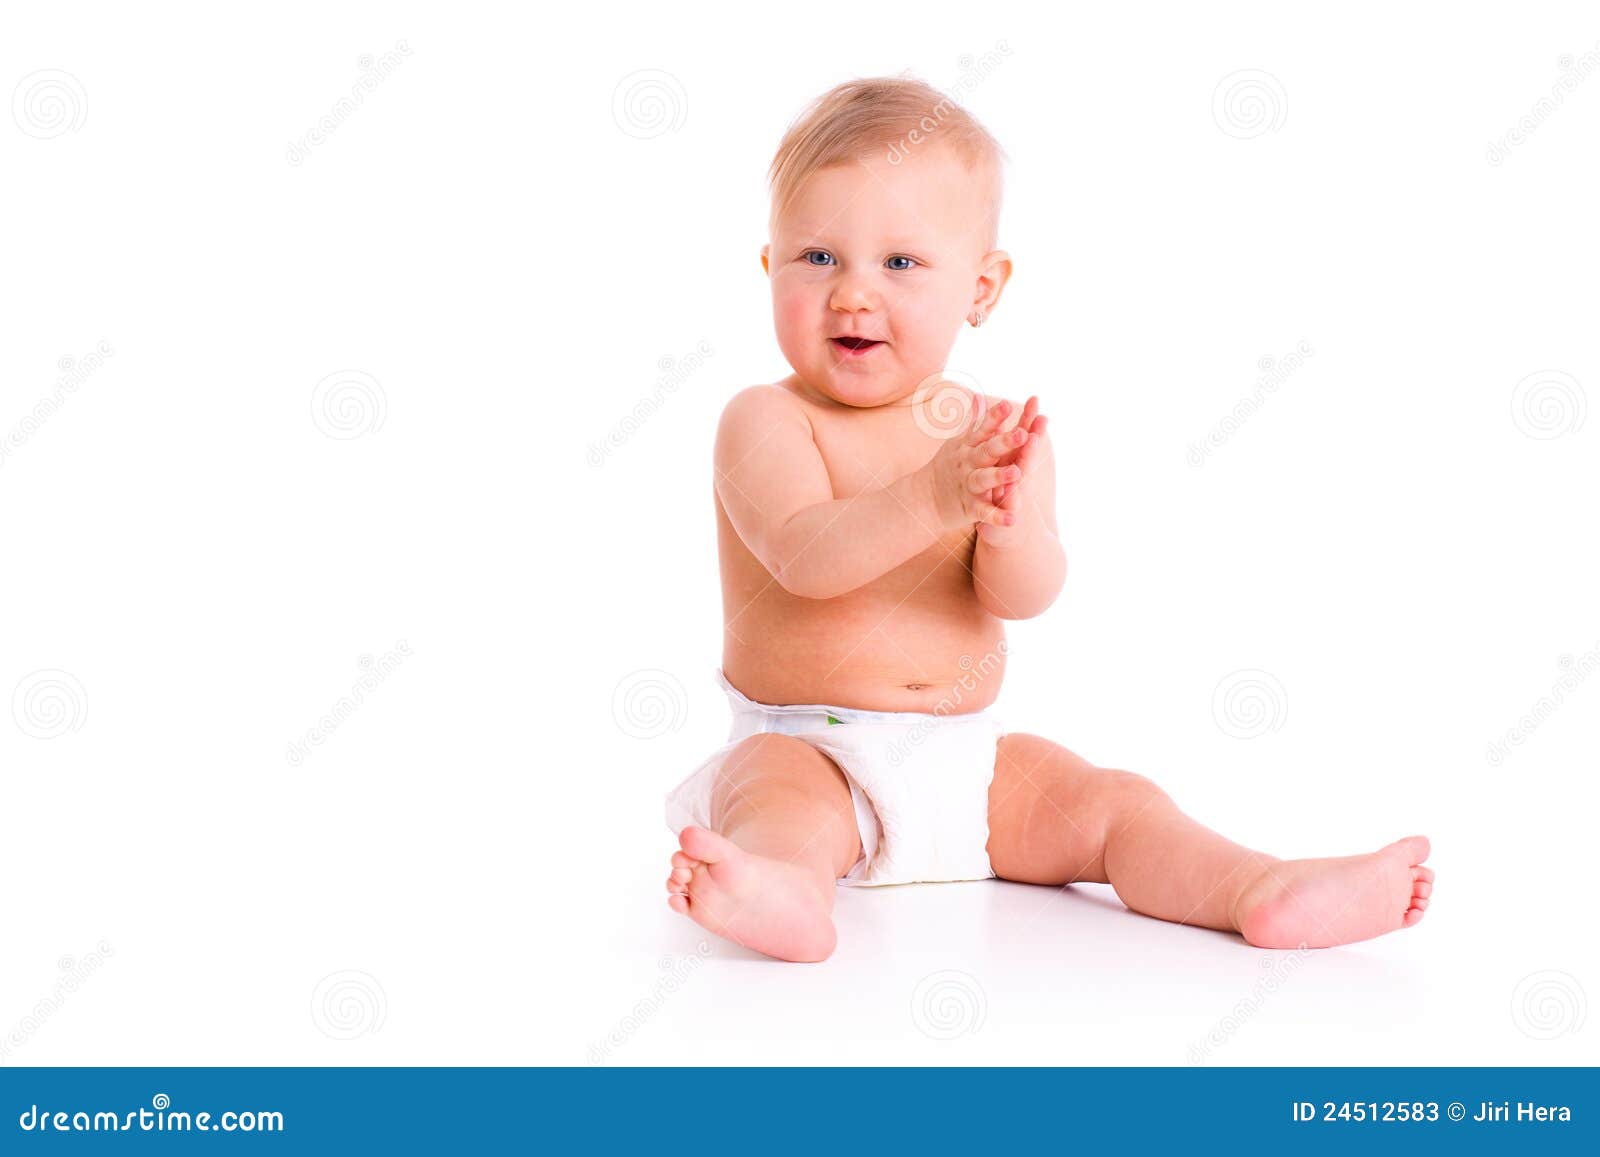 Diaper Naked Stock Images, Royalty-Free Images & Vectors 